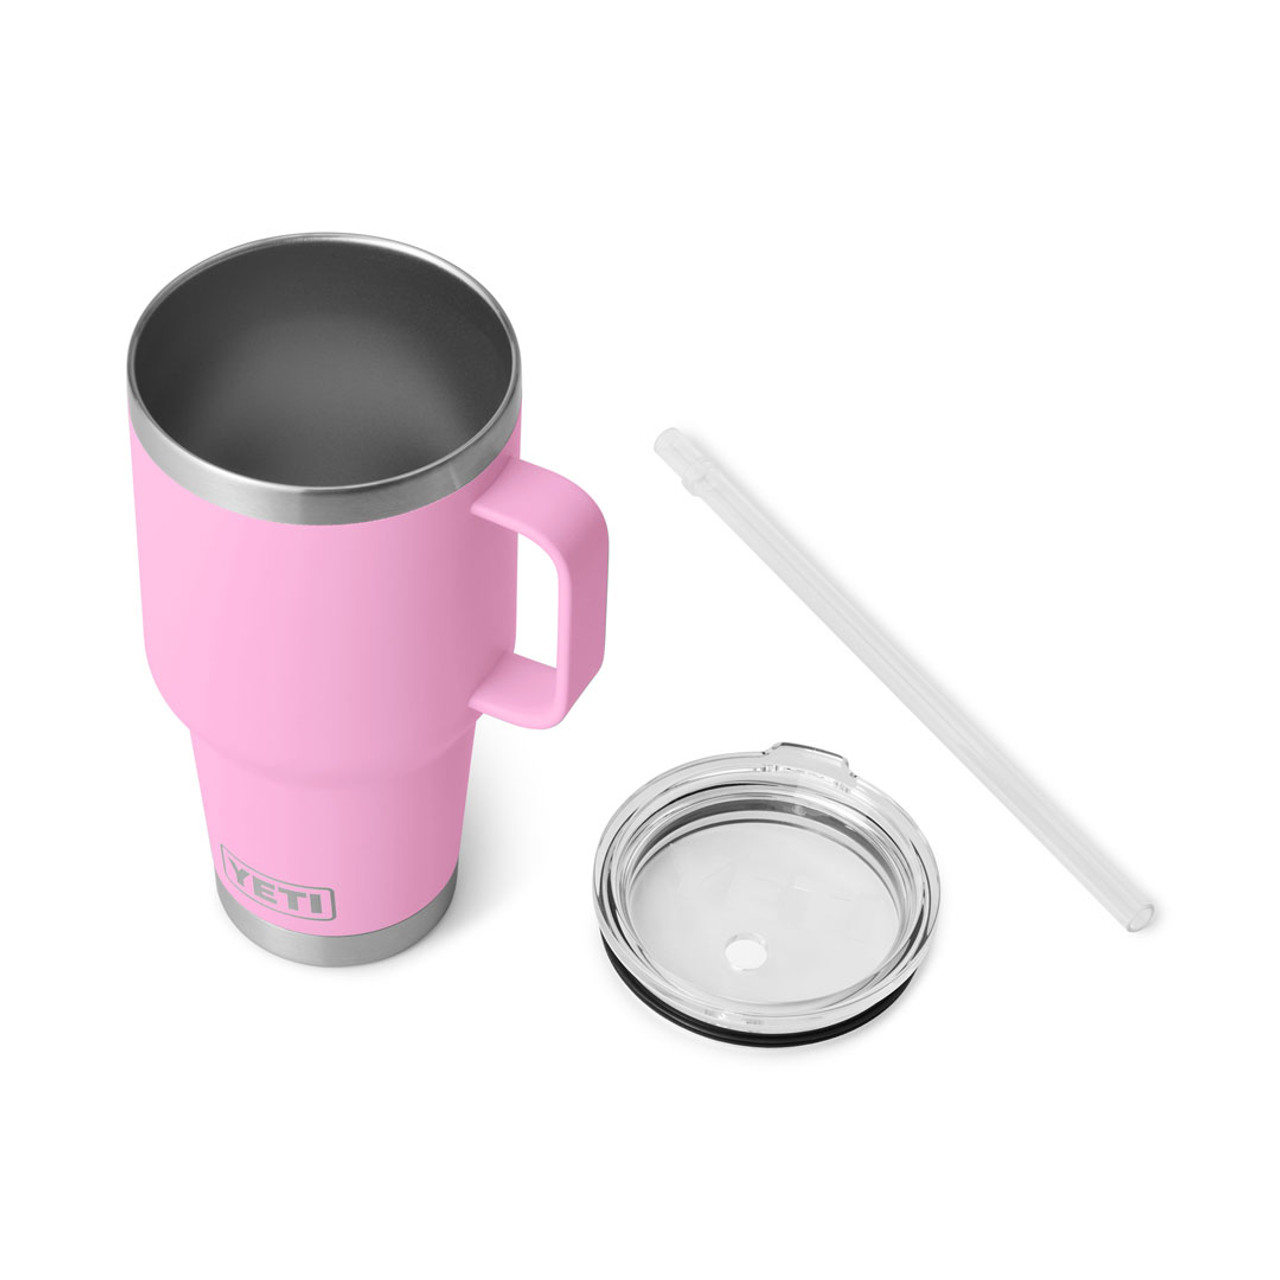  YETI Rambler 18 oz Bottle, Vacuum Insulated, Stainless Steel  with Straw Cap, Harbor Pink : Home & Kitchen